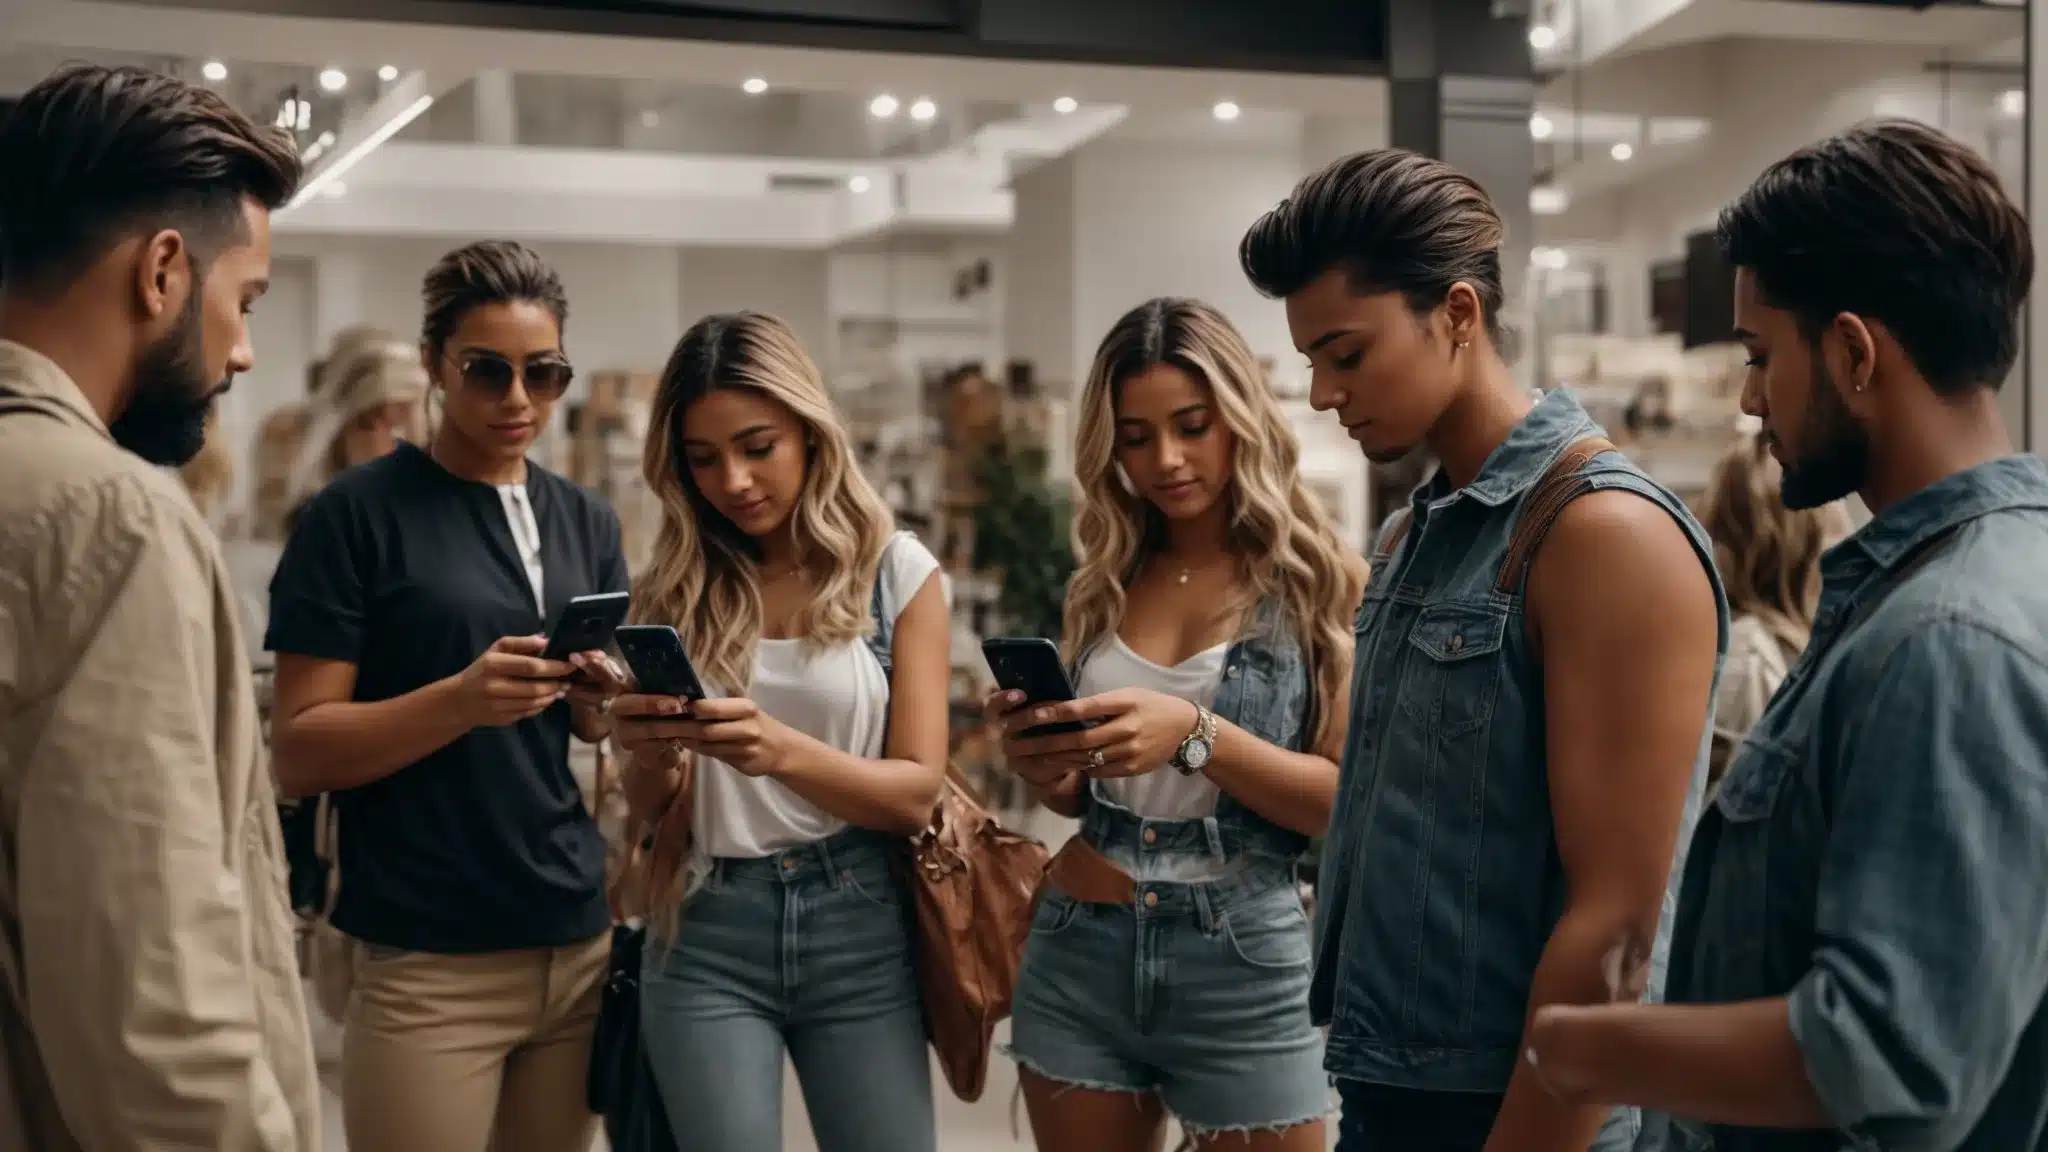 A Group Of Trendy Influencers Gather Around A Product Display, Capturing Content On Their Smartphones.